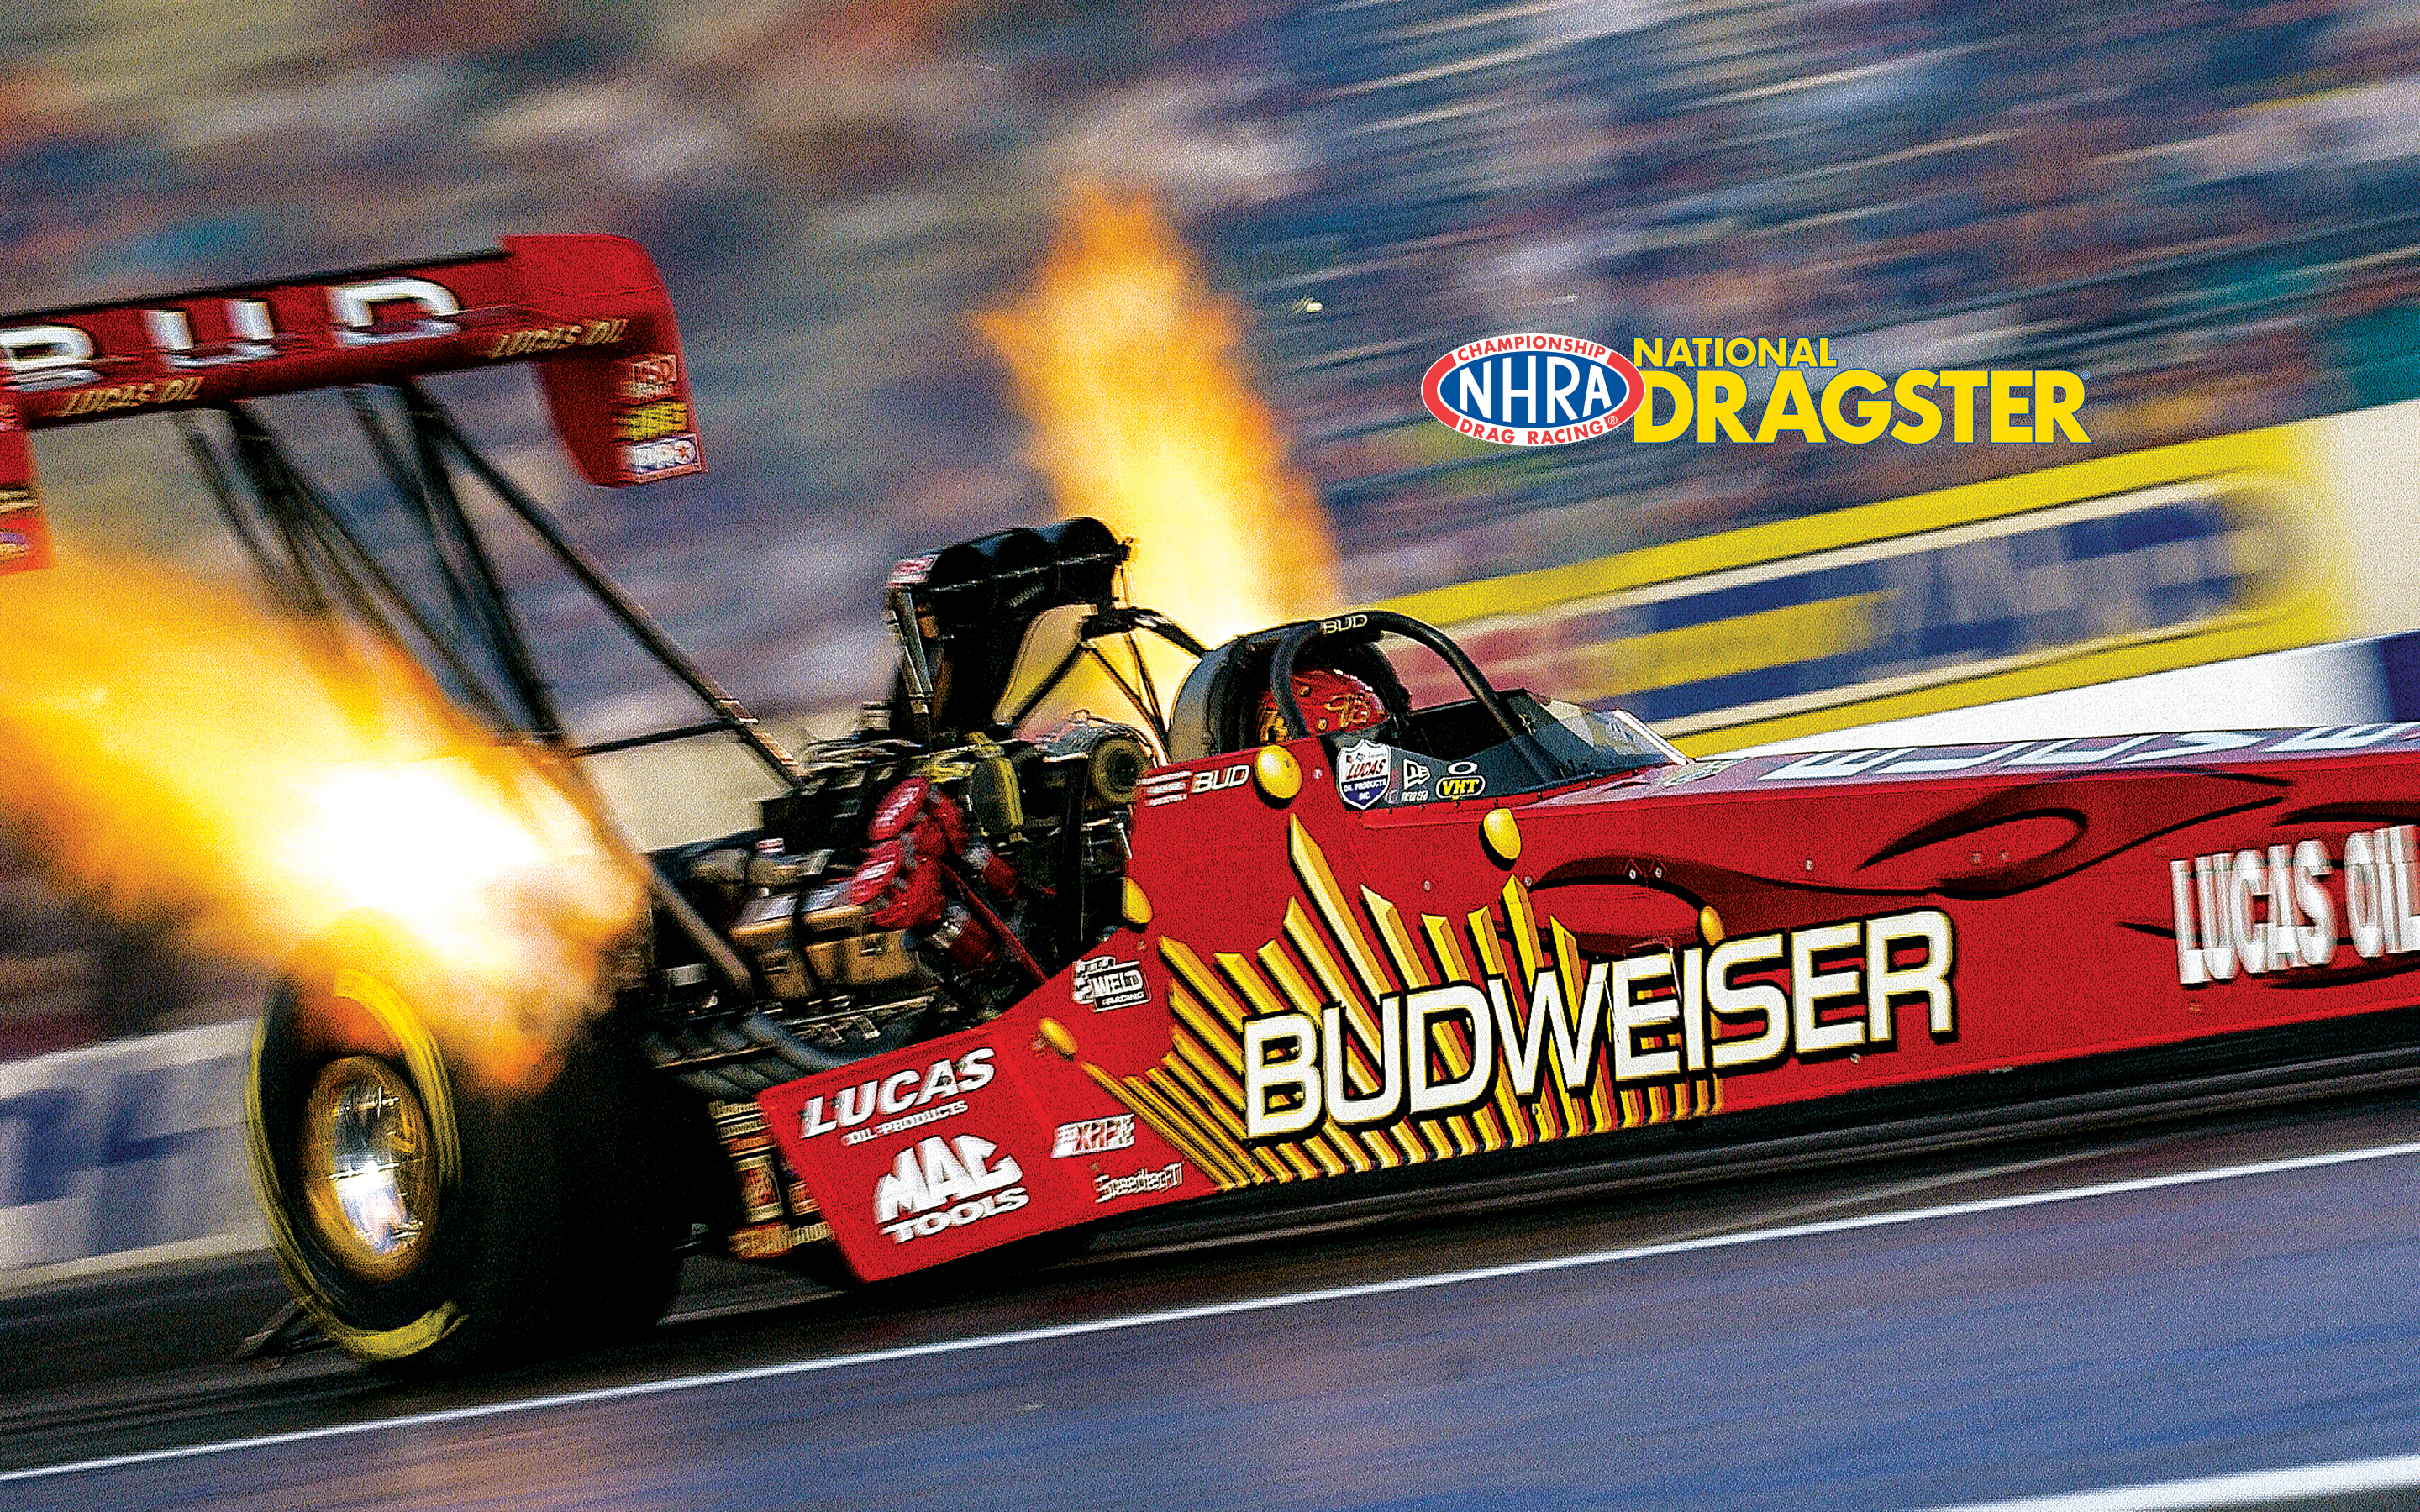 2880x1800 NHRA National Dragster wallpaper images (Issue 07, 2020) | NHRA